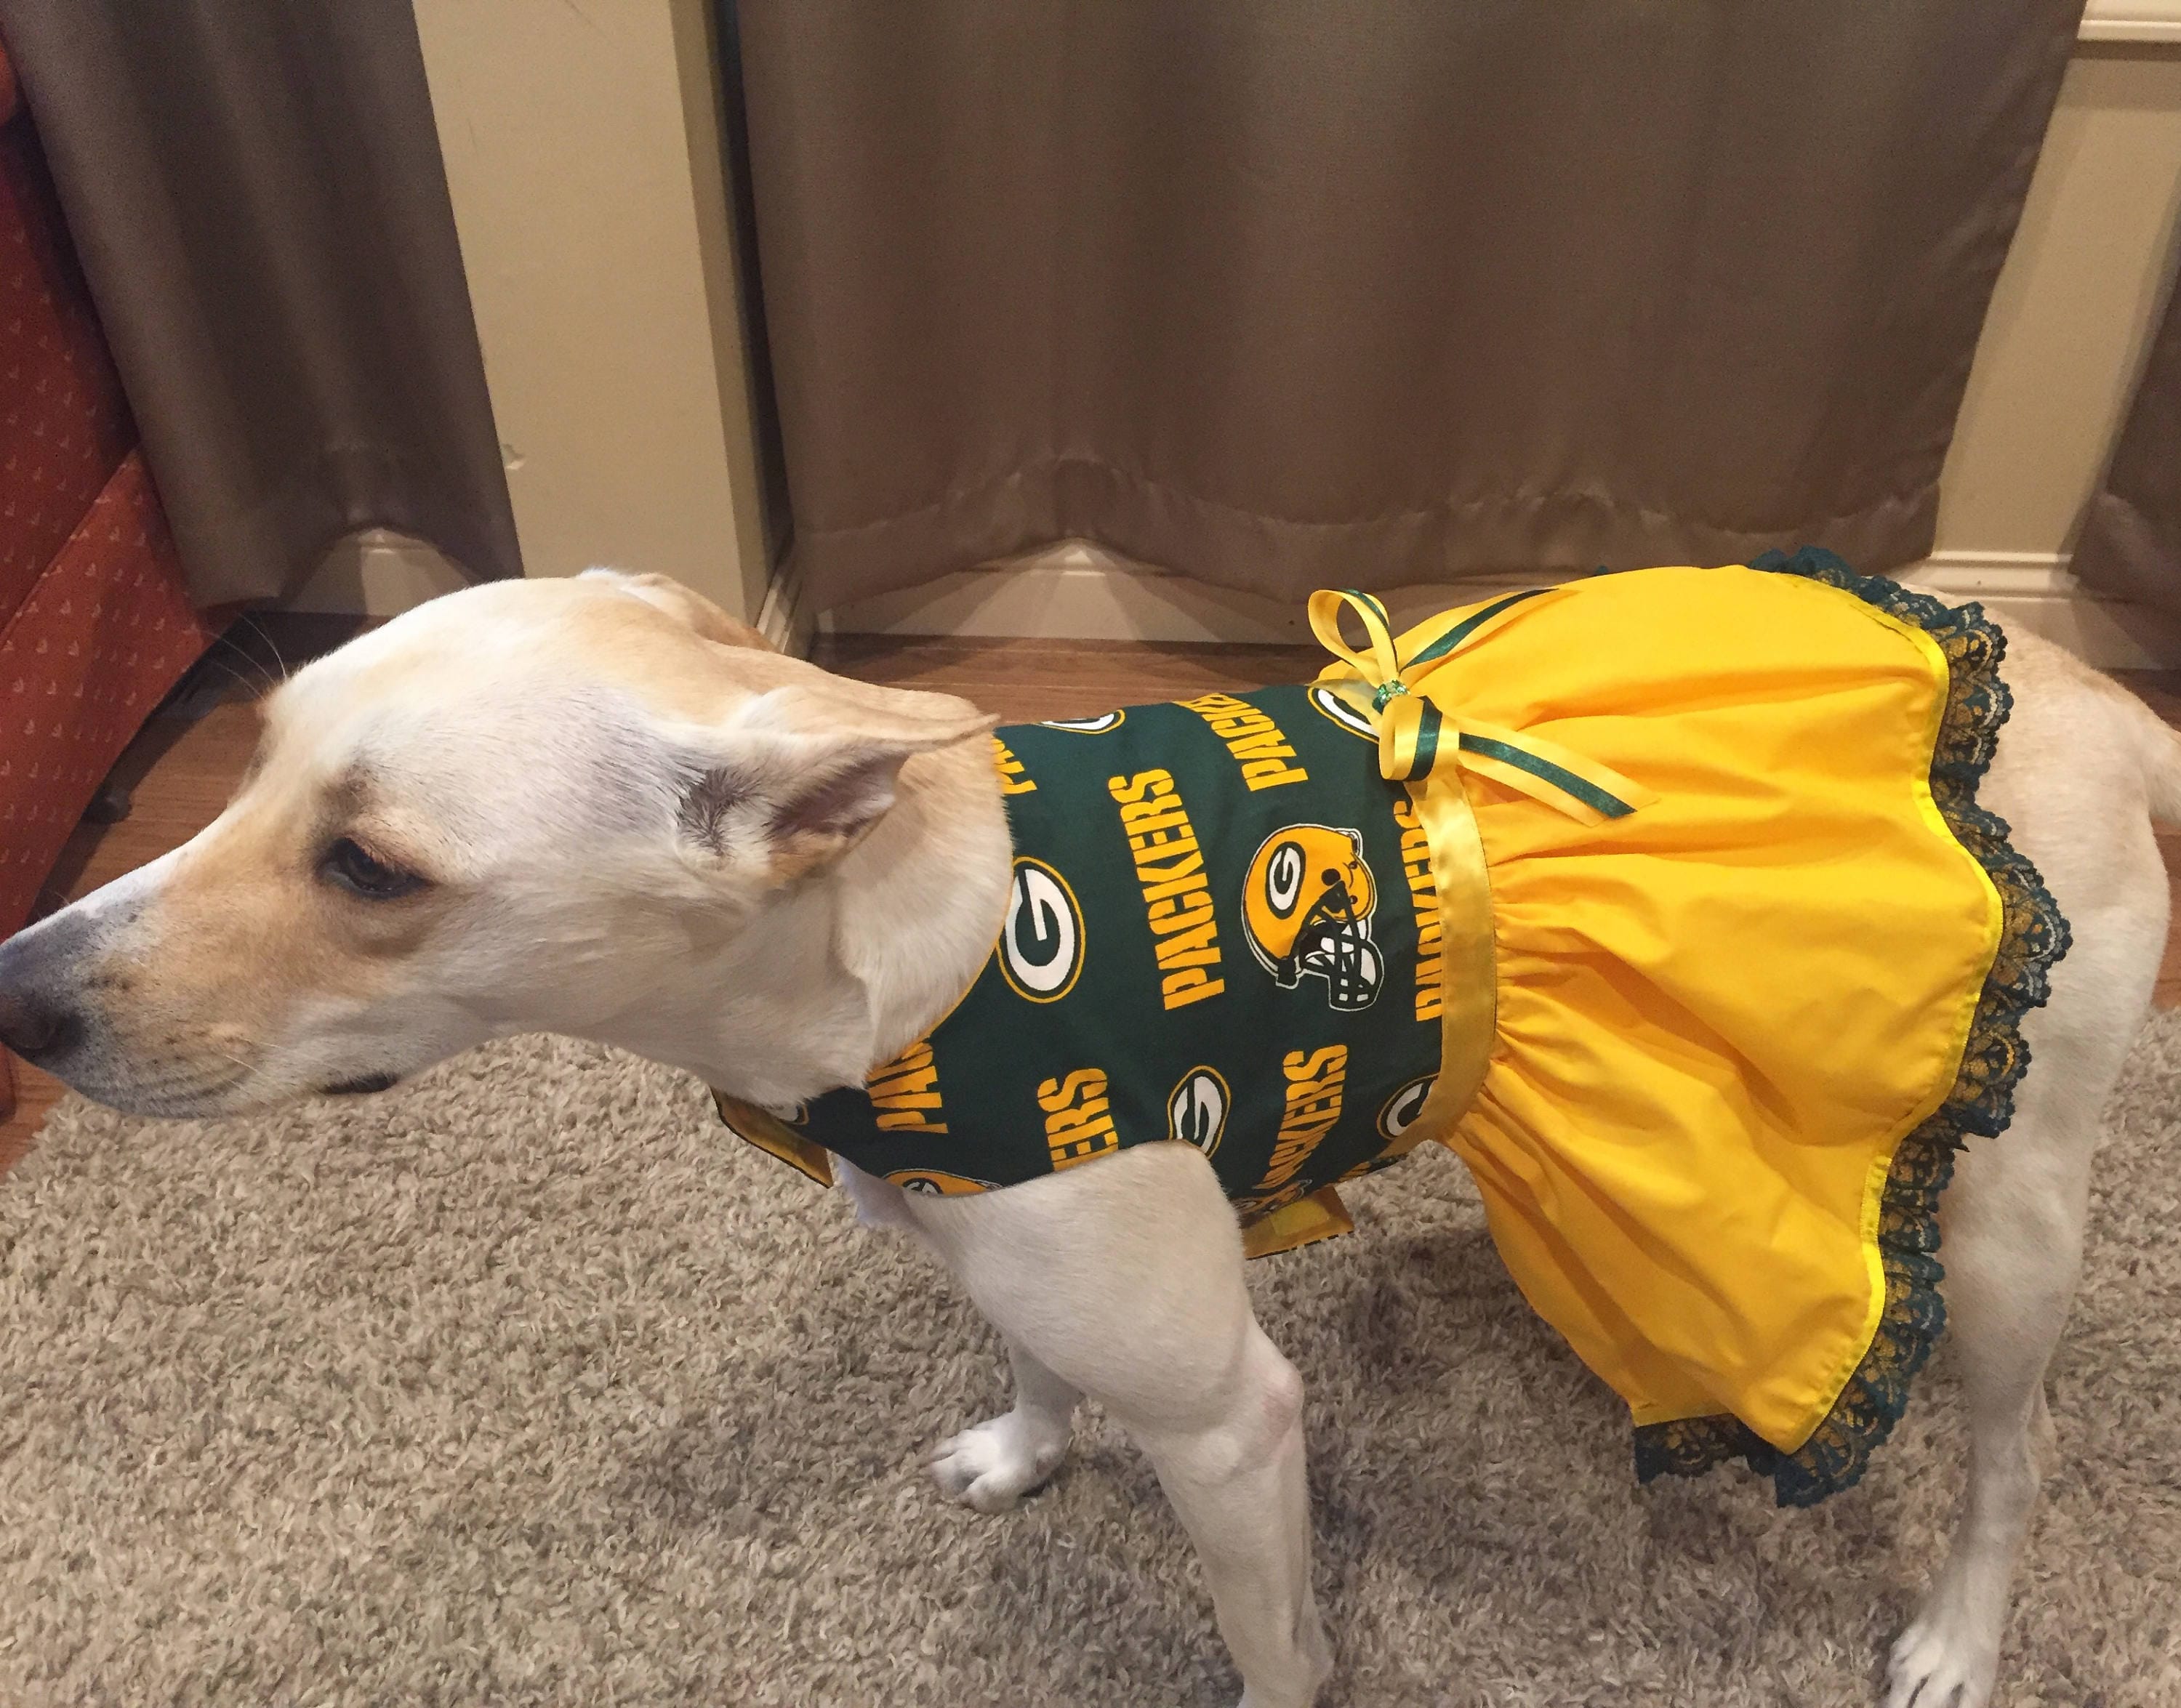 Official Green Bay Packers Dog Jerseys, Packers Pet Leash, Collar, Green  Bay Packers Pet Carrier